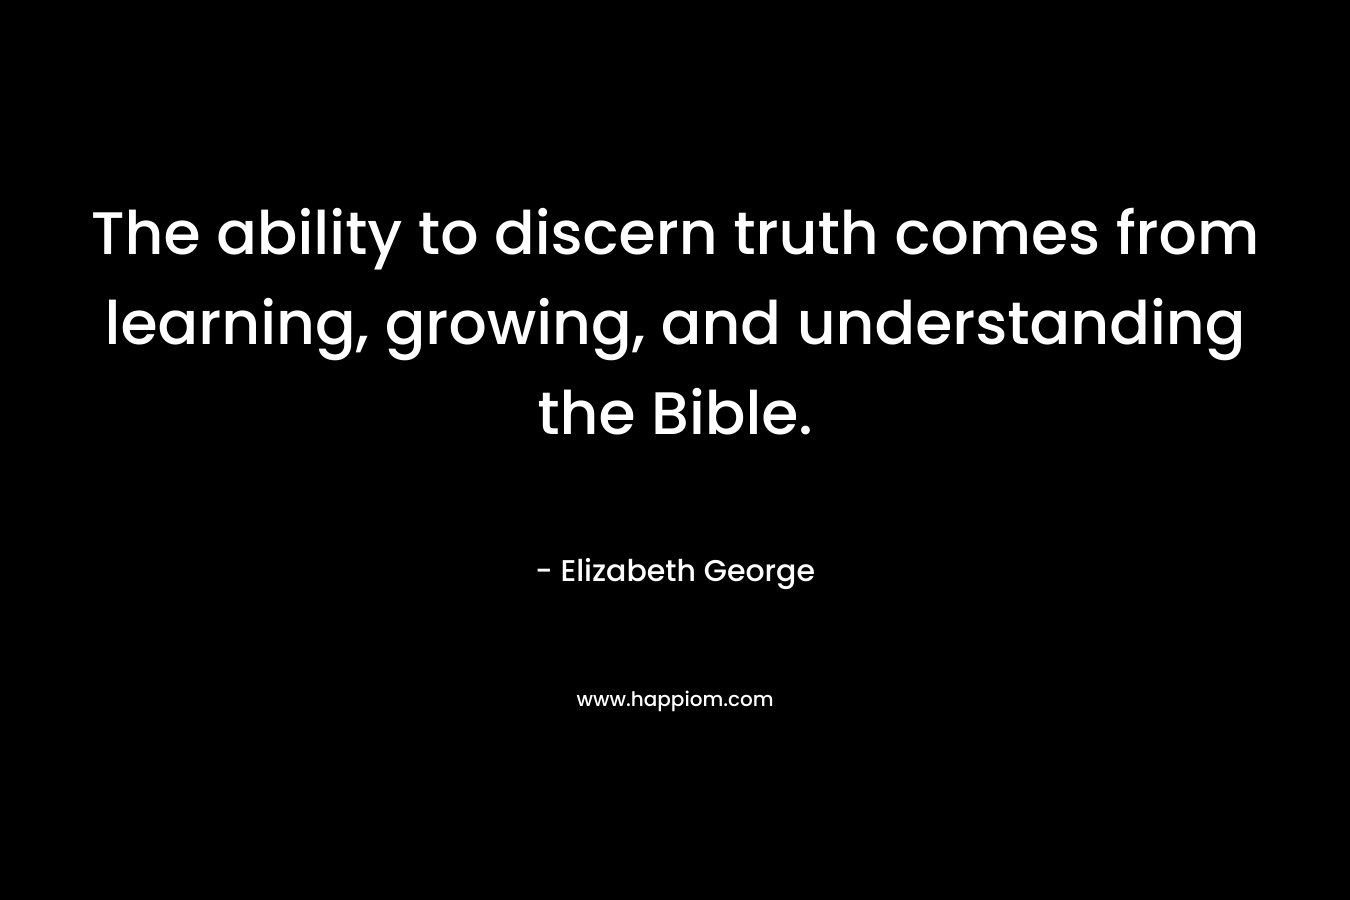 The ability to discern truth comes from learning, growing, and understanding the Bible.